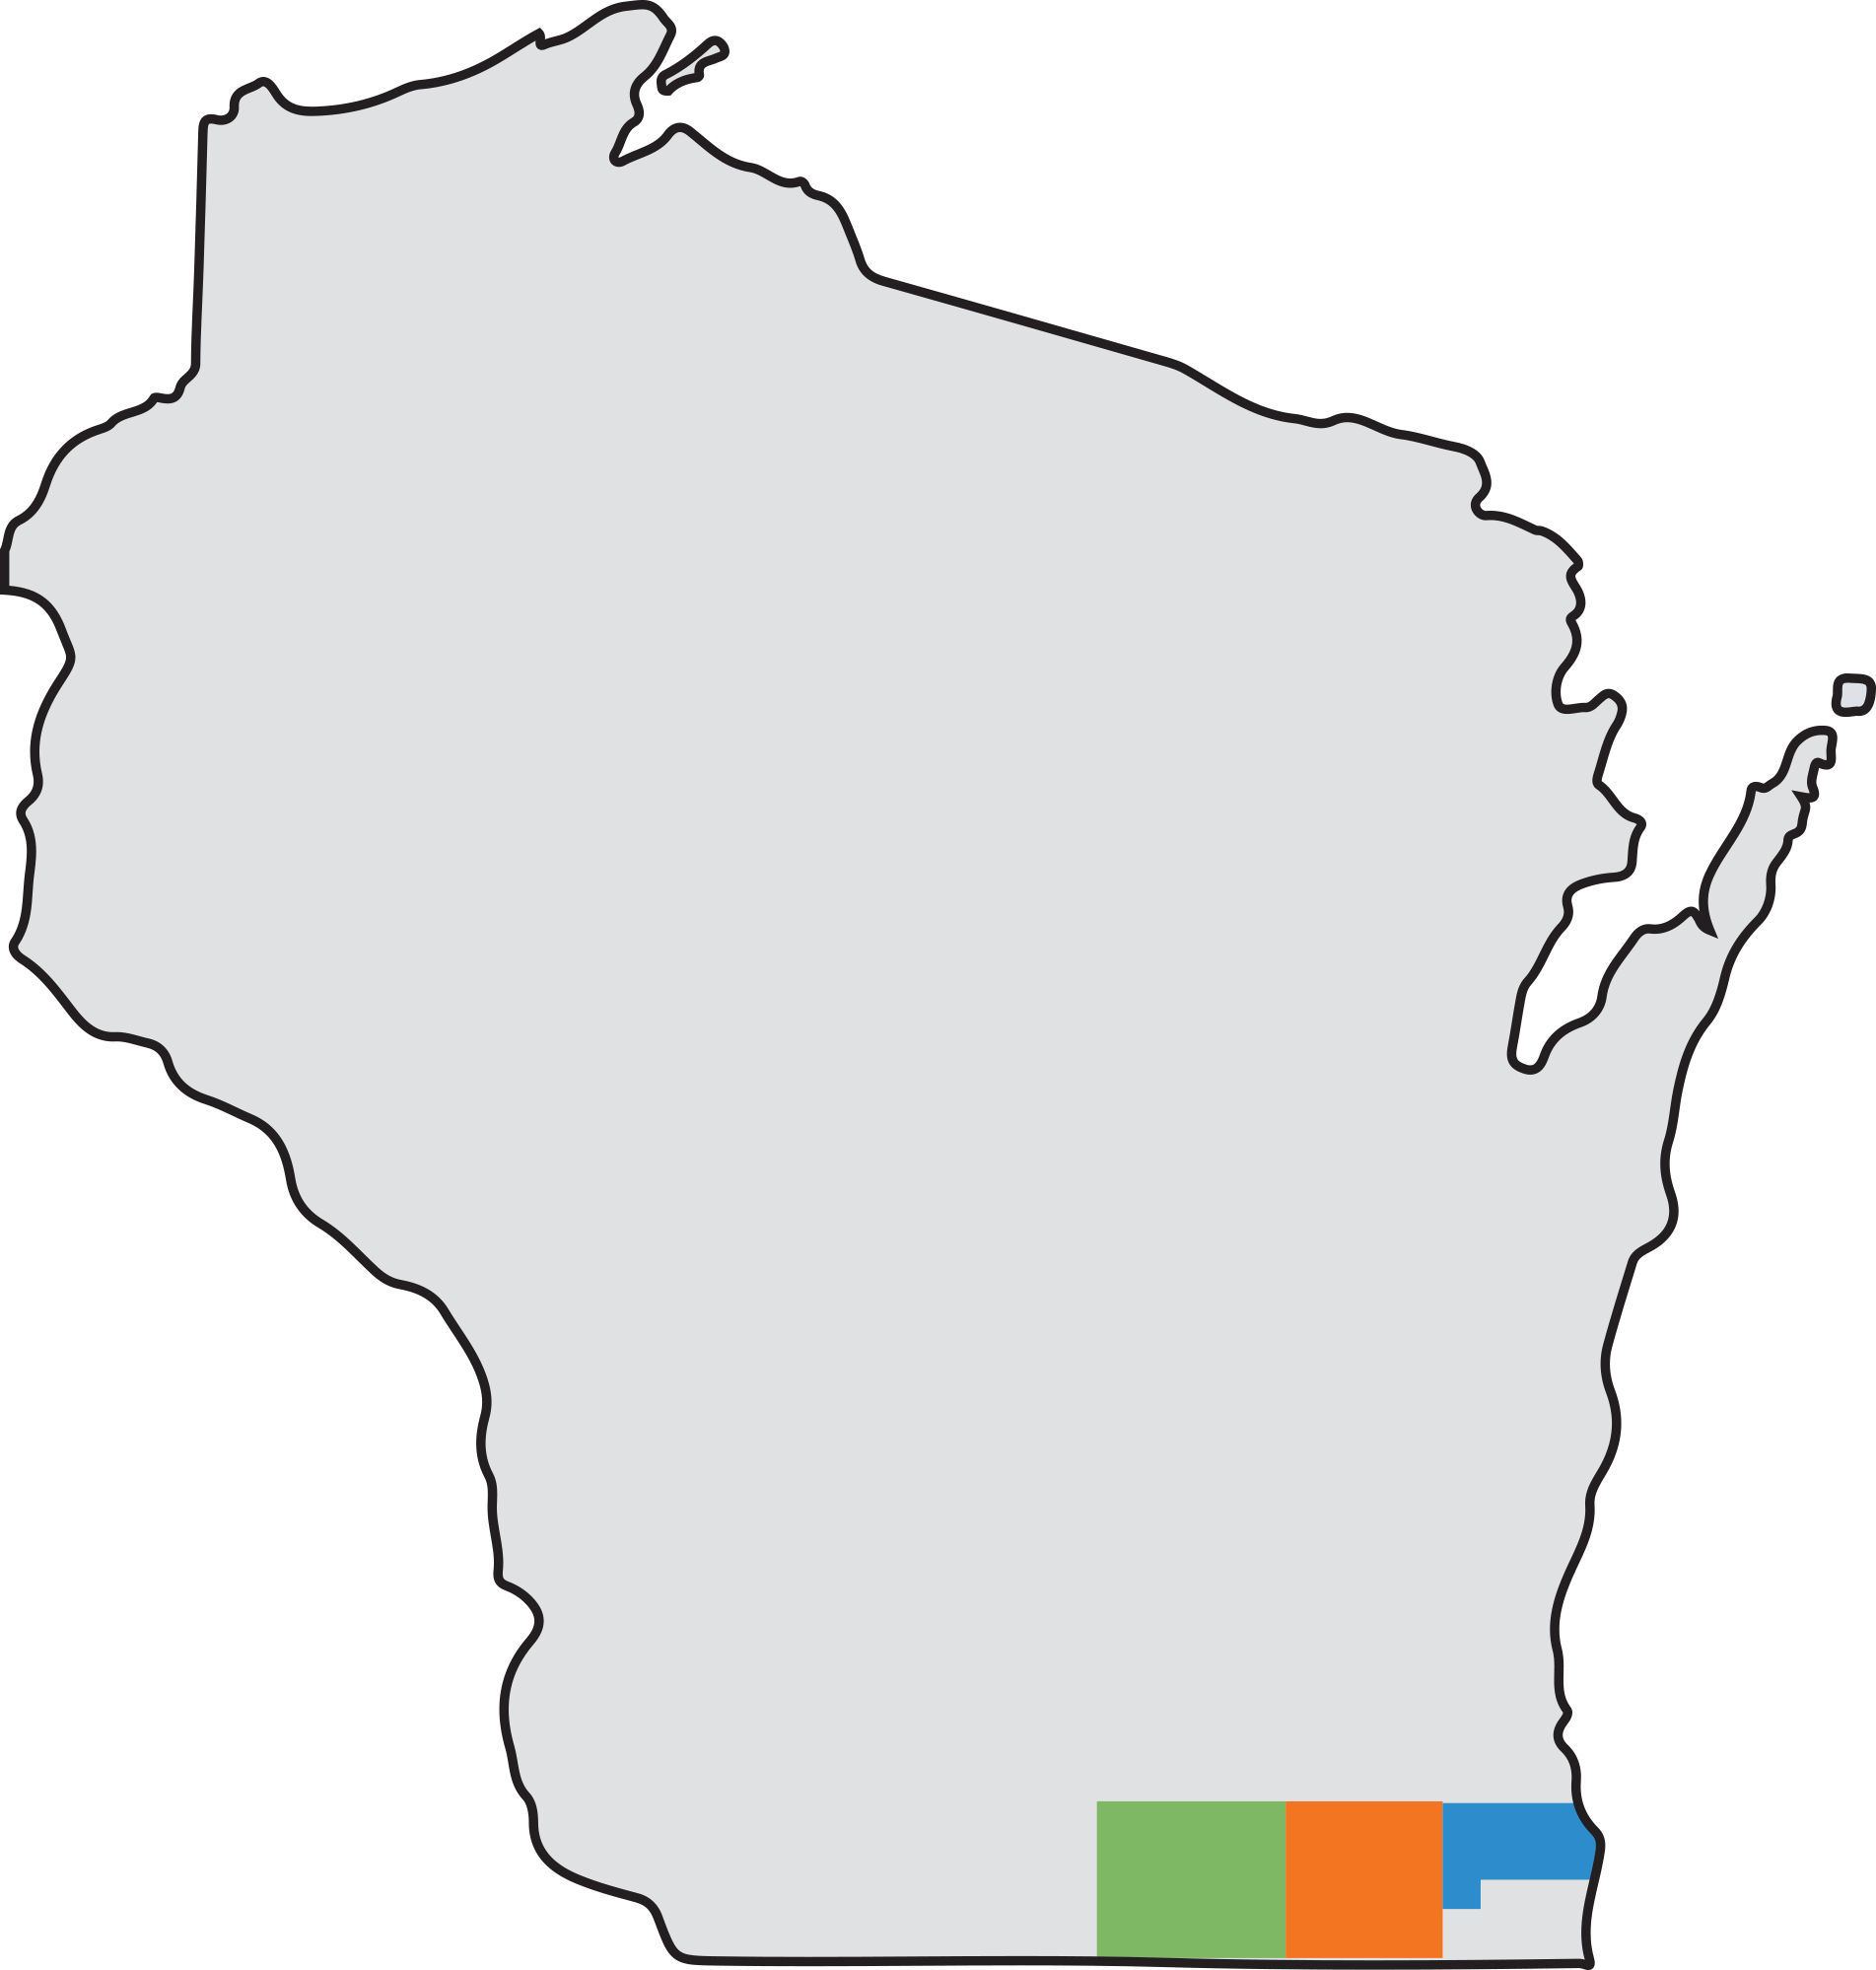 Map featuring a black outline of Wisconsin filled in with gray. Racine, Rock, and Walworth counties are featured in different bright colors.